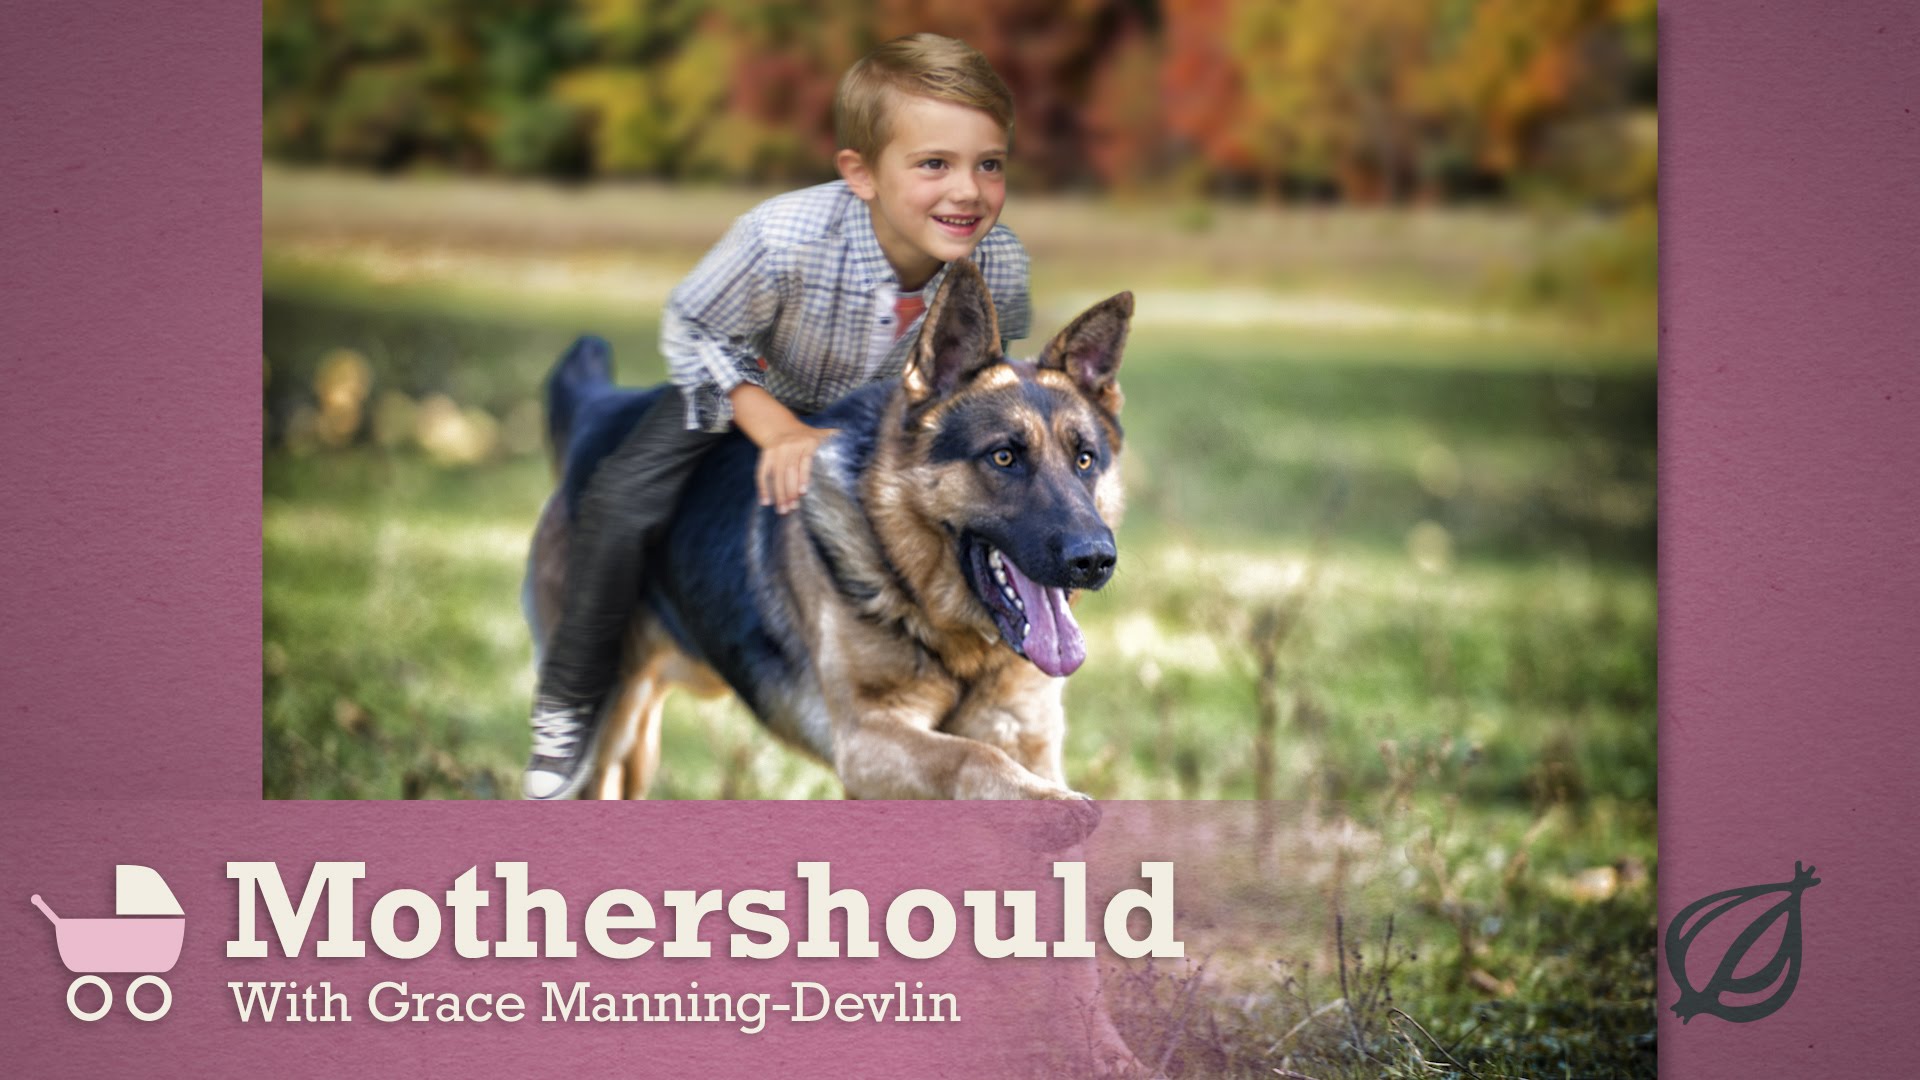 It's A Mom's Right To Decide Whether Her Kids Ride A Stranger's Dog ...